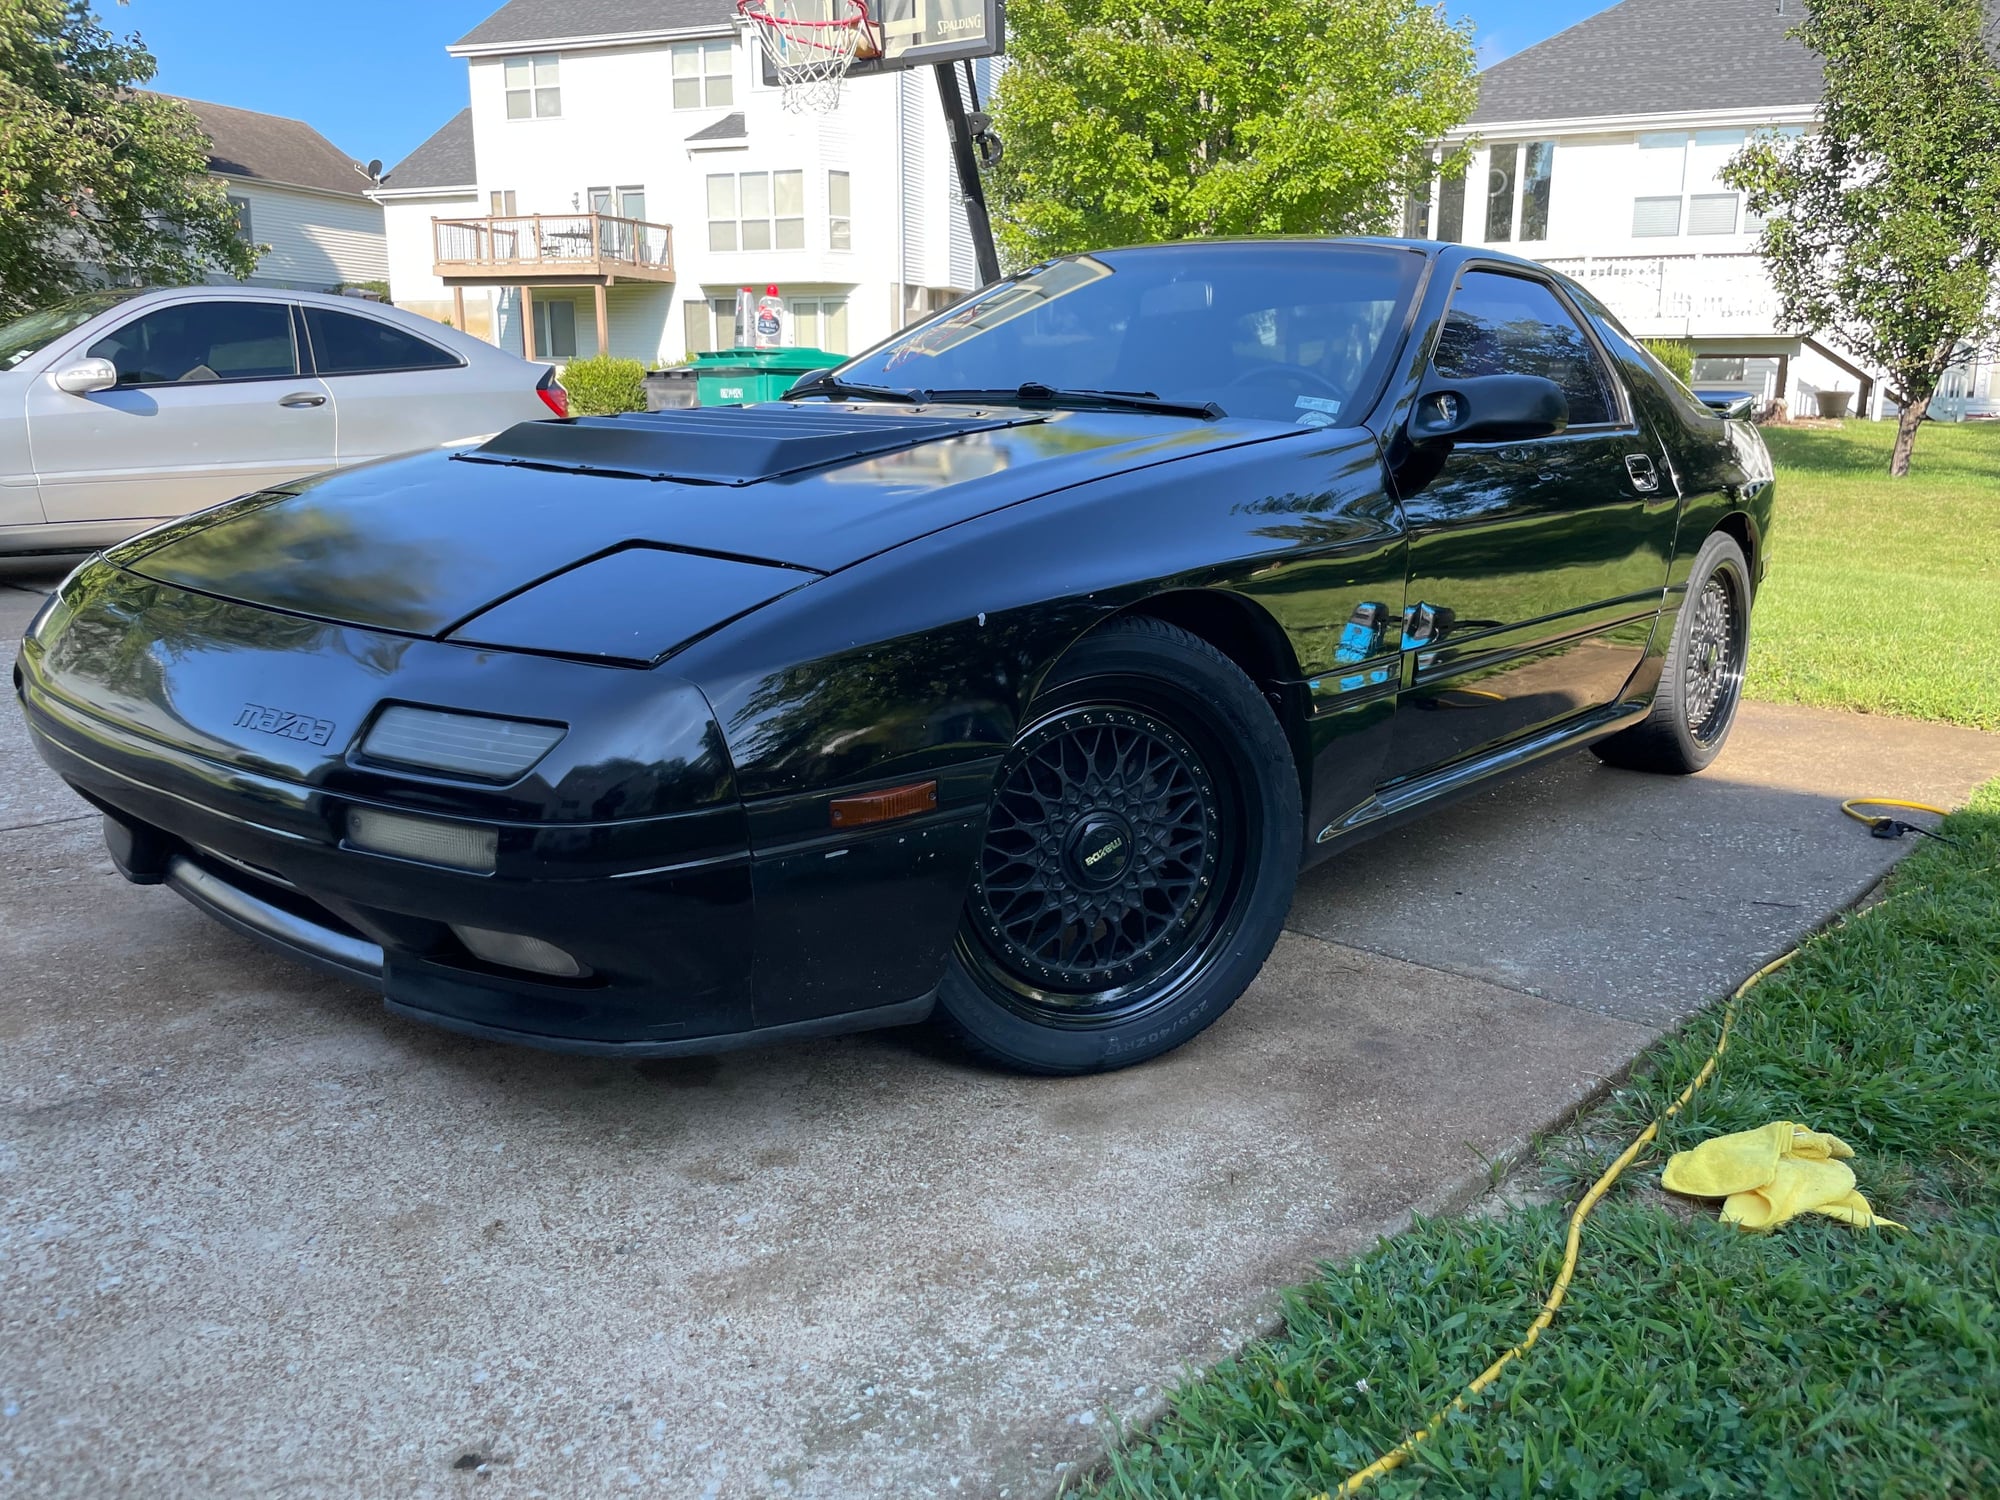 1989 Mazda RX-7 - 1989 S5 Black T2 - Used - VIN JM1FC3325K0705945 - 116,000 Miles - Other - 2WD - Manual - Coupe - Black - Saint Louis, MO 63114, United States